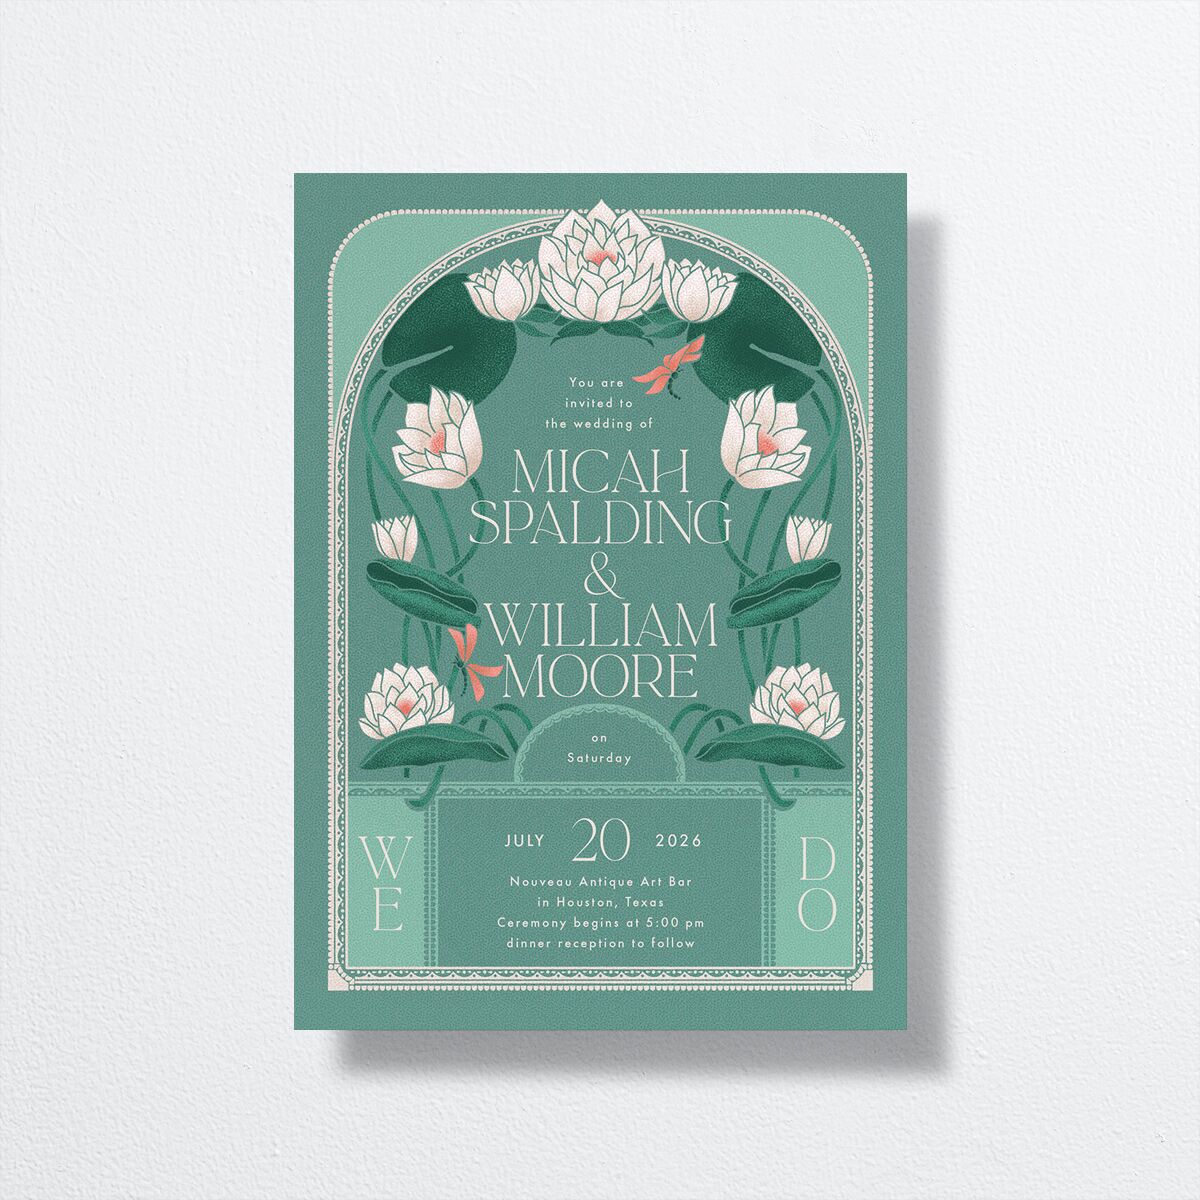 Twilight Pond Wedding Invitations front in teal